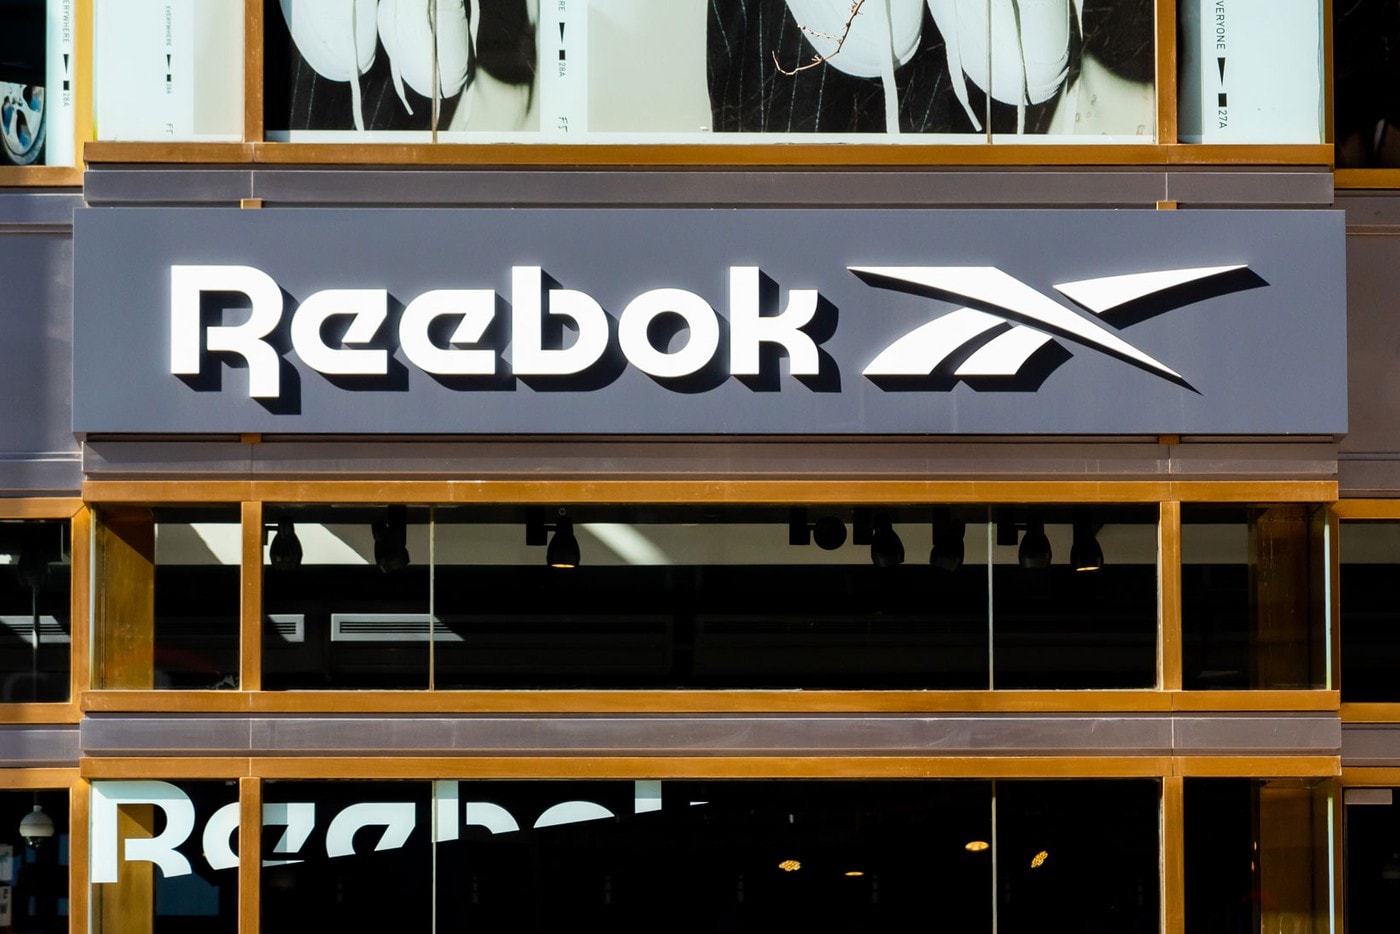 reebok adidas selling confirmed potential purchaser authentic brands group abg buying march announcement business